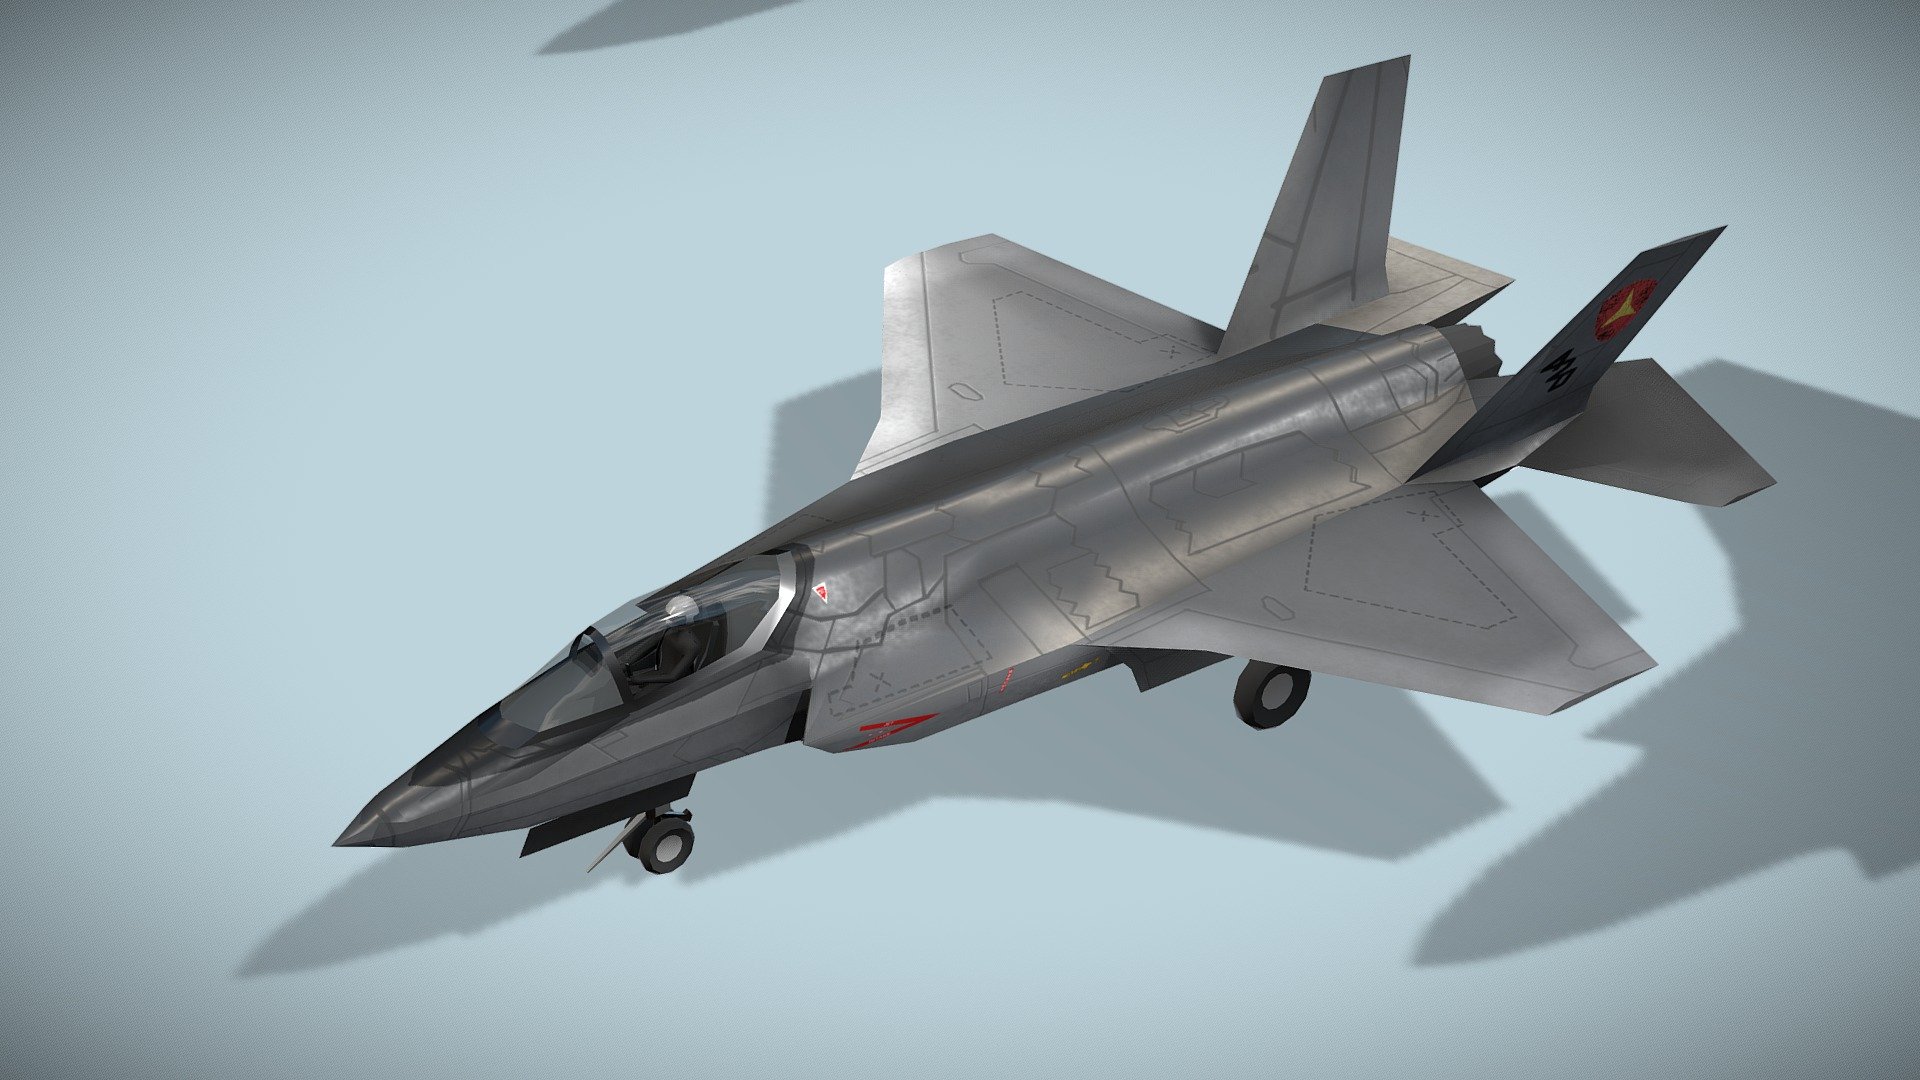 Lockheed Martin F-35 Lightning II

Lowpoly model of american jet fighter



Lockheed Martin F-35 Lightning II is an American family of single-seat, single-engine, all-weather stealth multirole combat aircraft that is intended to perform both air superiority and strike missions. It is also able to provide electronic warfare and intelligence, surveillance, and reconnaissance capabilities. Lockheed Martin is the prime F-35 contractor, with principal partners Northrop Grumman and BAE Systems. The aircraft has three main variants: the conventional takeoff and landing (CTOL) F-35A, the short take-off and vertical-landing (STOVL) F-35B, and the carrier-based (CV/CATOBAR) F-35C. The U.S. plans to buy 2,456 F-35s through 2044.



1 standing version and 2 flying versions in set.

Model has bump map, roughness map and 3 x diffuse textures.



Check also my other aircrafts and cars.

Patreon with monthly free model - Lockheed Martin F-35 Lightning II - Buy Royalty Free 3D model by NETRUNNER_pl 3d model